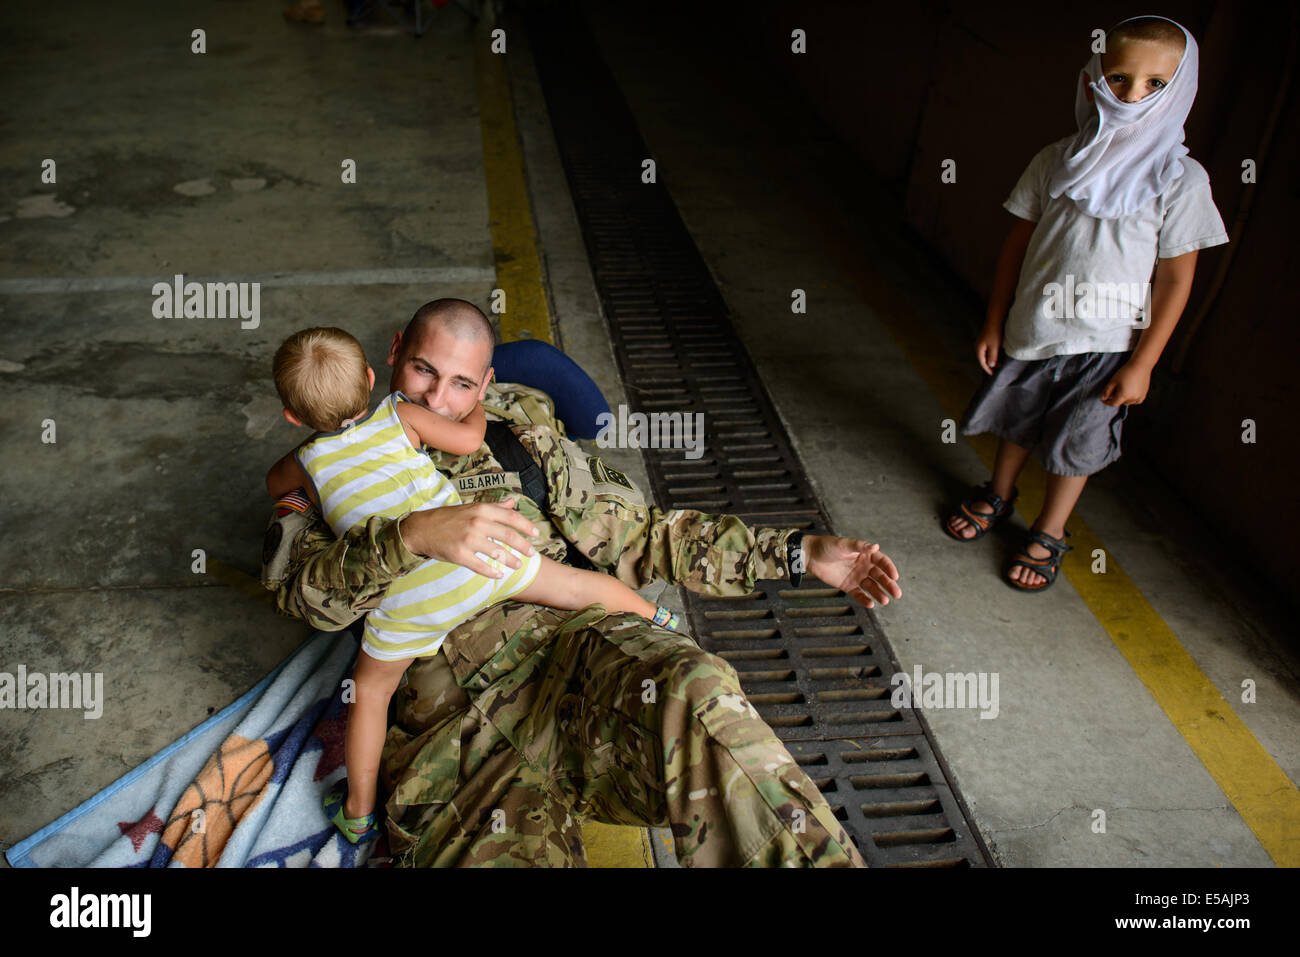 July 24, 2014 - Fort Bragg, NC, USA - July 24, 2014 - Fort Bragg, N.C., USA - Warrant Officer Casey Matullo plays with his two sons, Gabriel, 2, and Michael, Thursday, July 24, 2014, on Fort Bragg, N.C., before he and his fellow soldiers from Company C, 3rd General Support Aviation Battalion, 82nd Combat Aviation Brigade deploy to Afghanistan for nine months. (Credit Image: © Andrew Craft/ZUMA Wire/ZUMAPRESS.com) Stock Photo